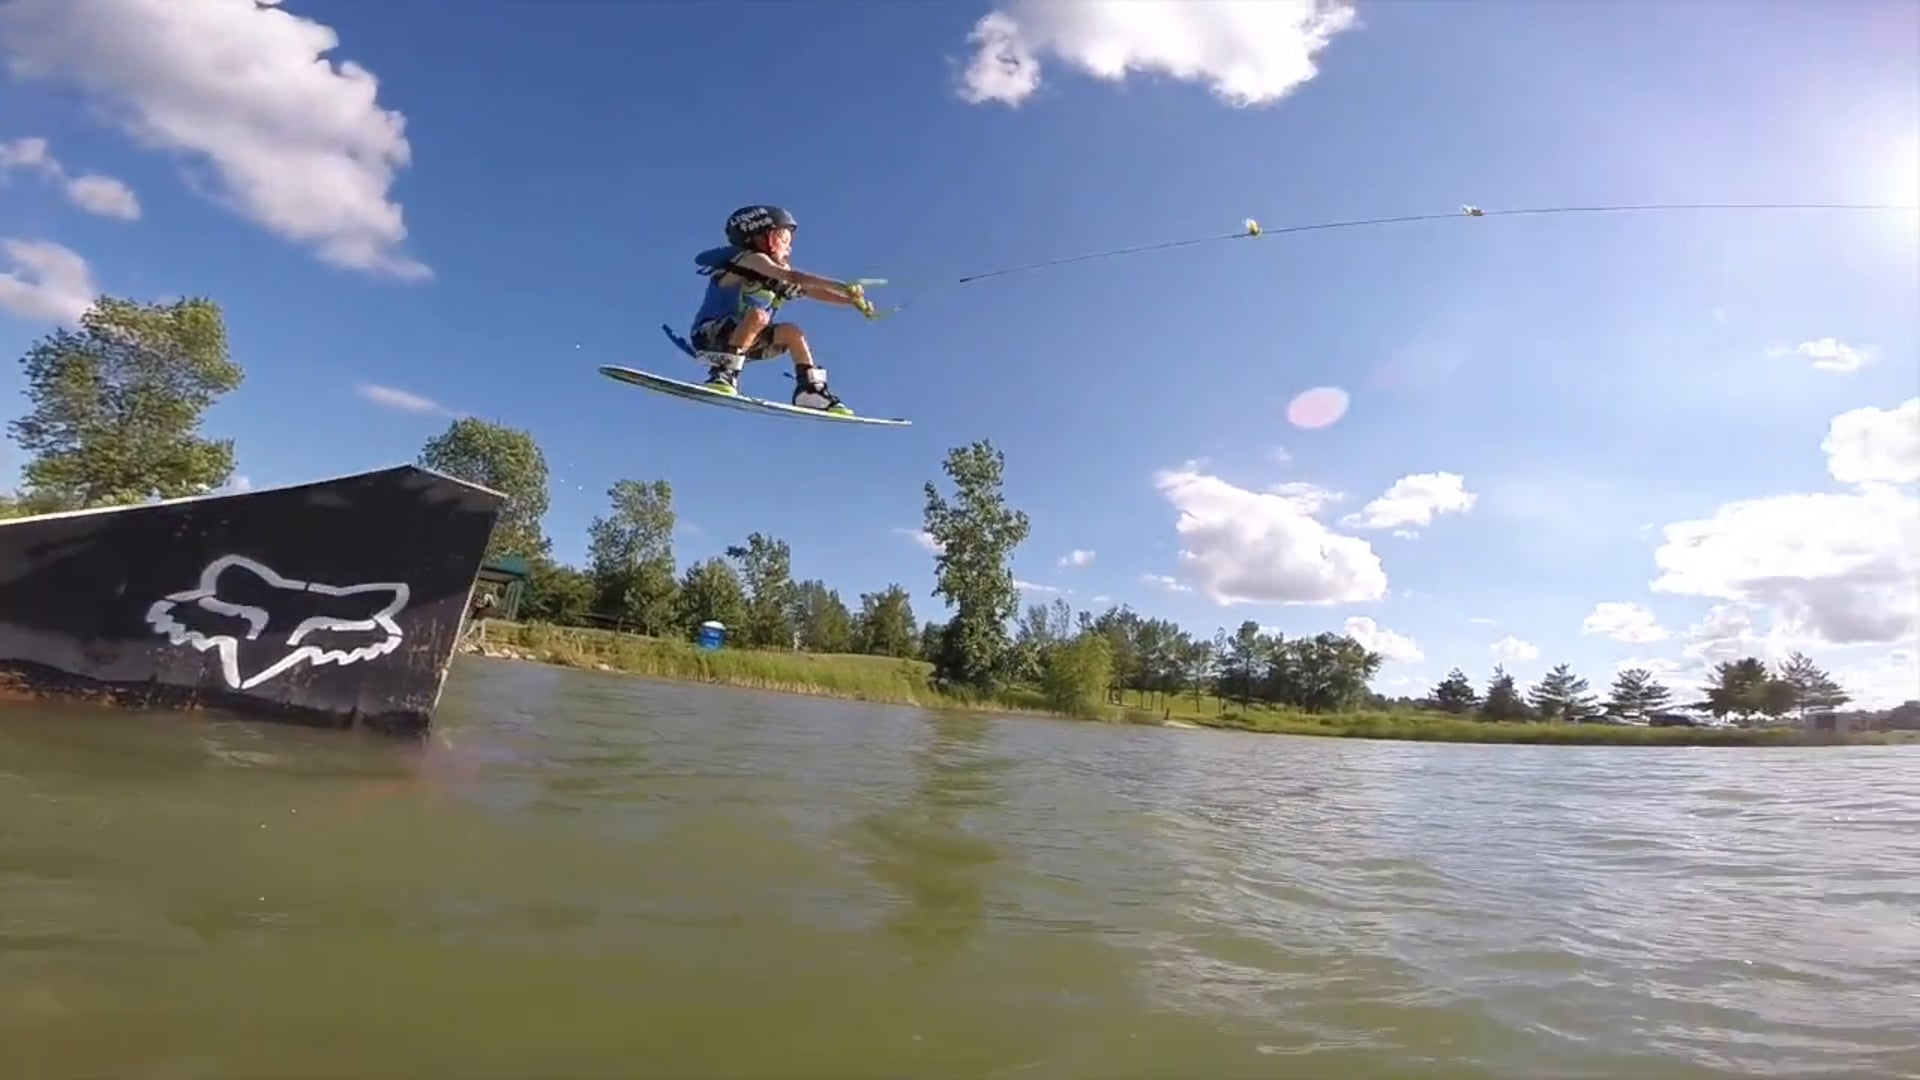 5 1/2 riders / Cable Wakeboarding / Boarder Pass fun edit